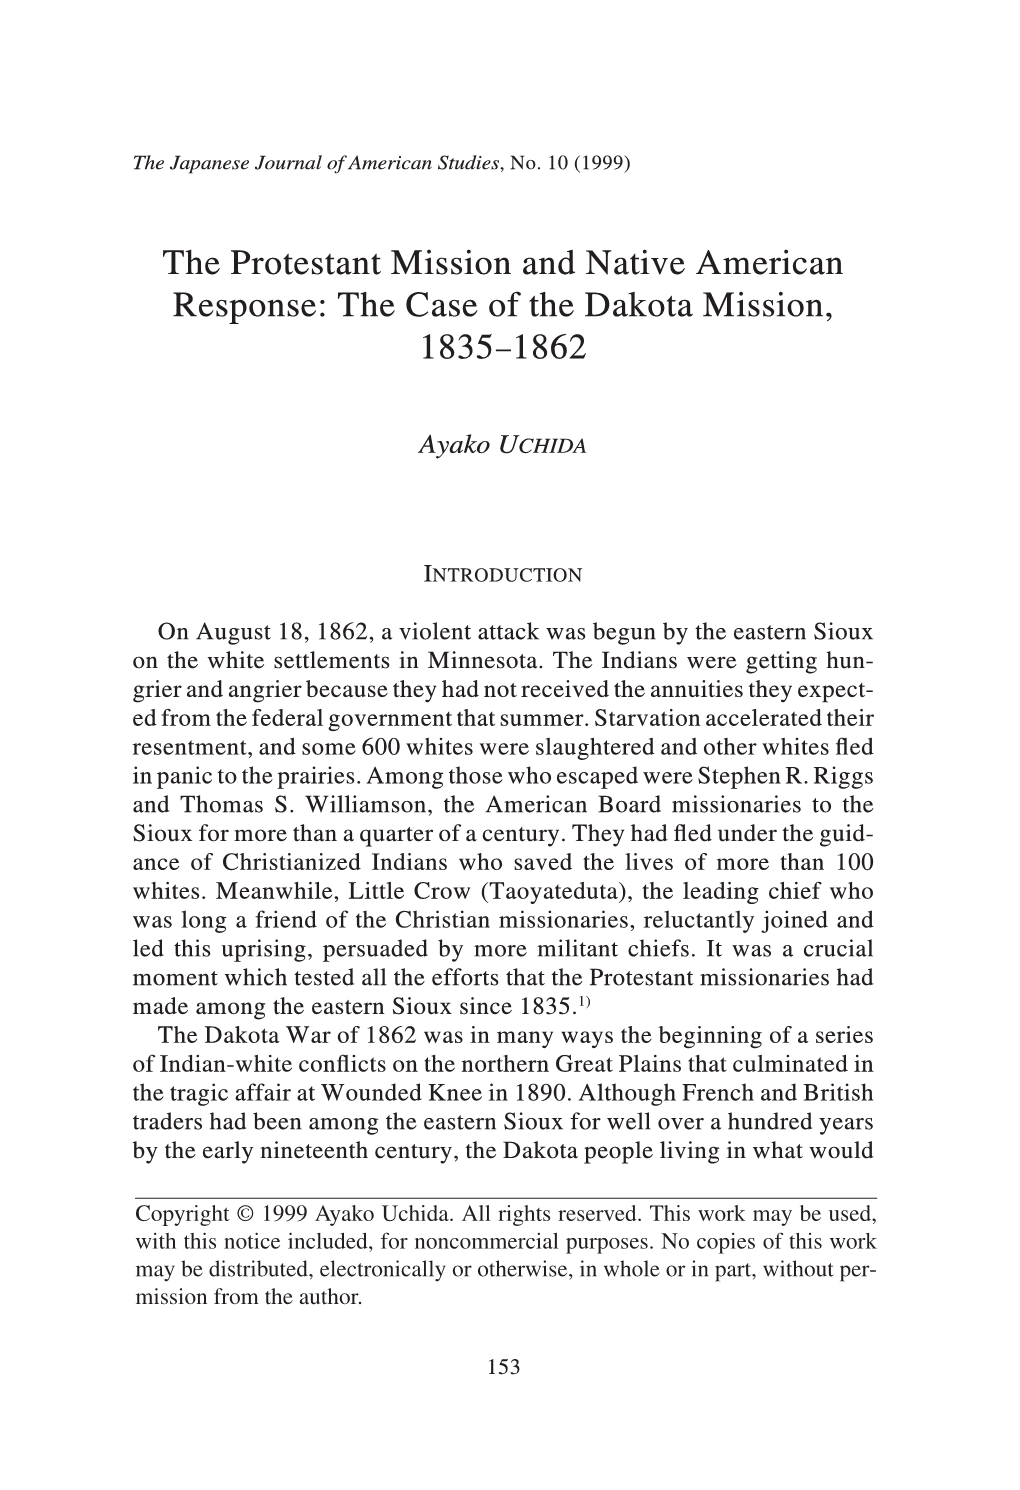 The Protestant Mission and Native American Response: the Case of the Dakota Mission, 1835–1862